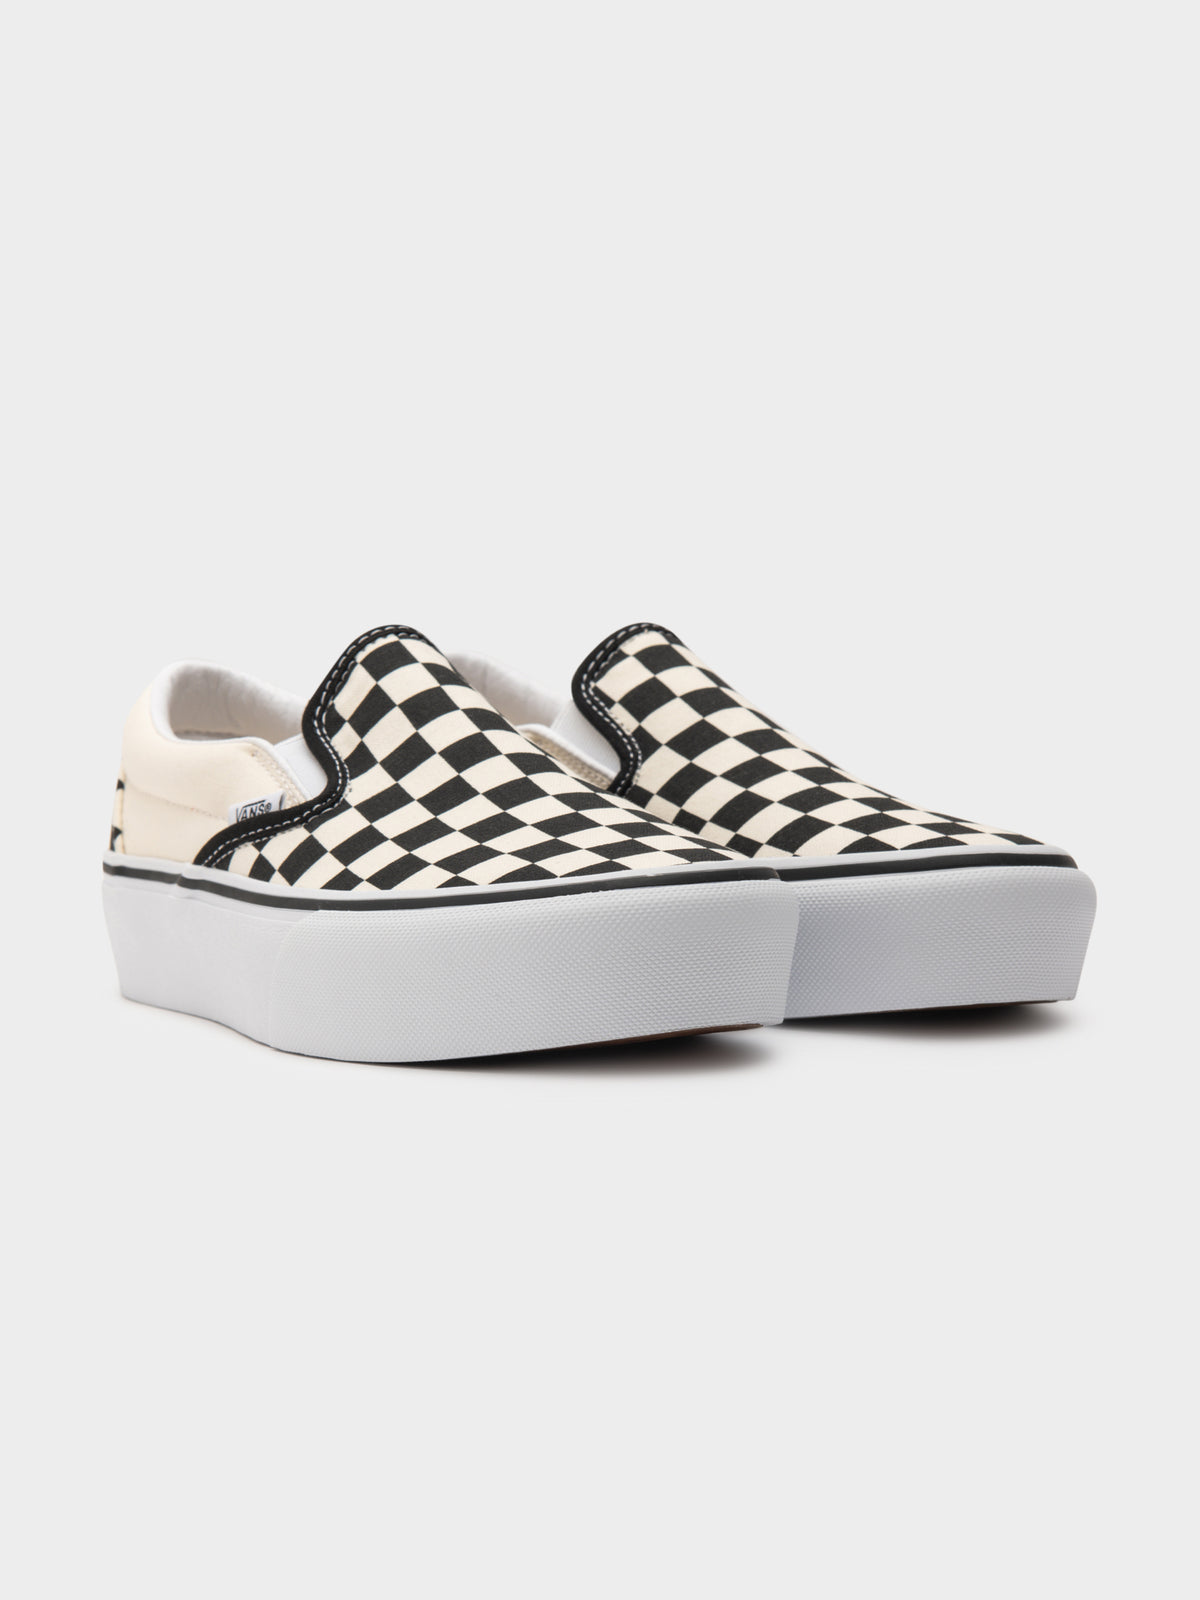 Womens Classic Slip On Platform Sneakers in Black &amp; White Checkerboard